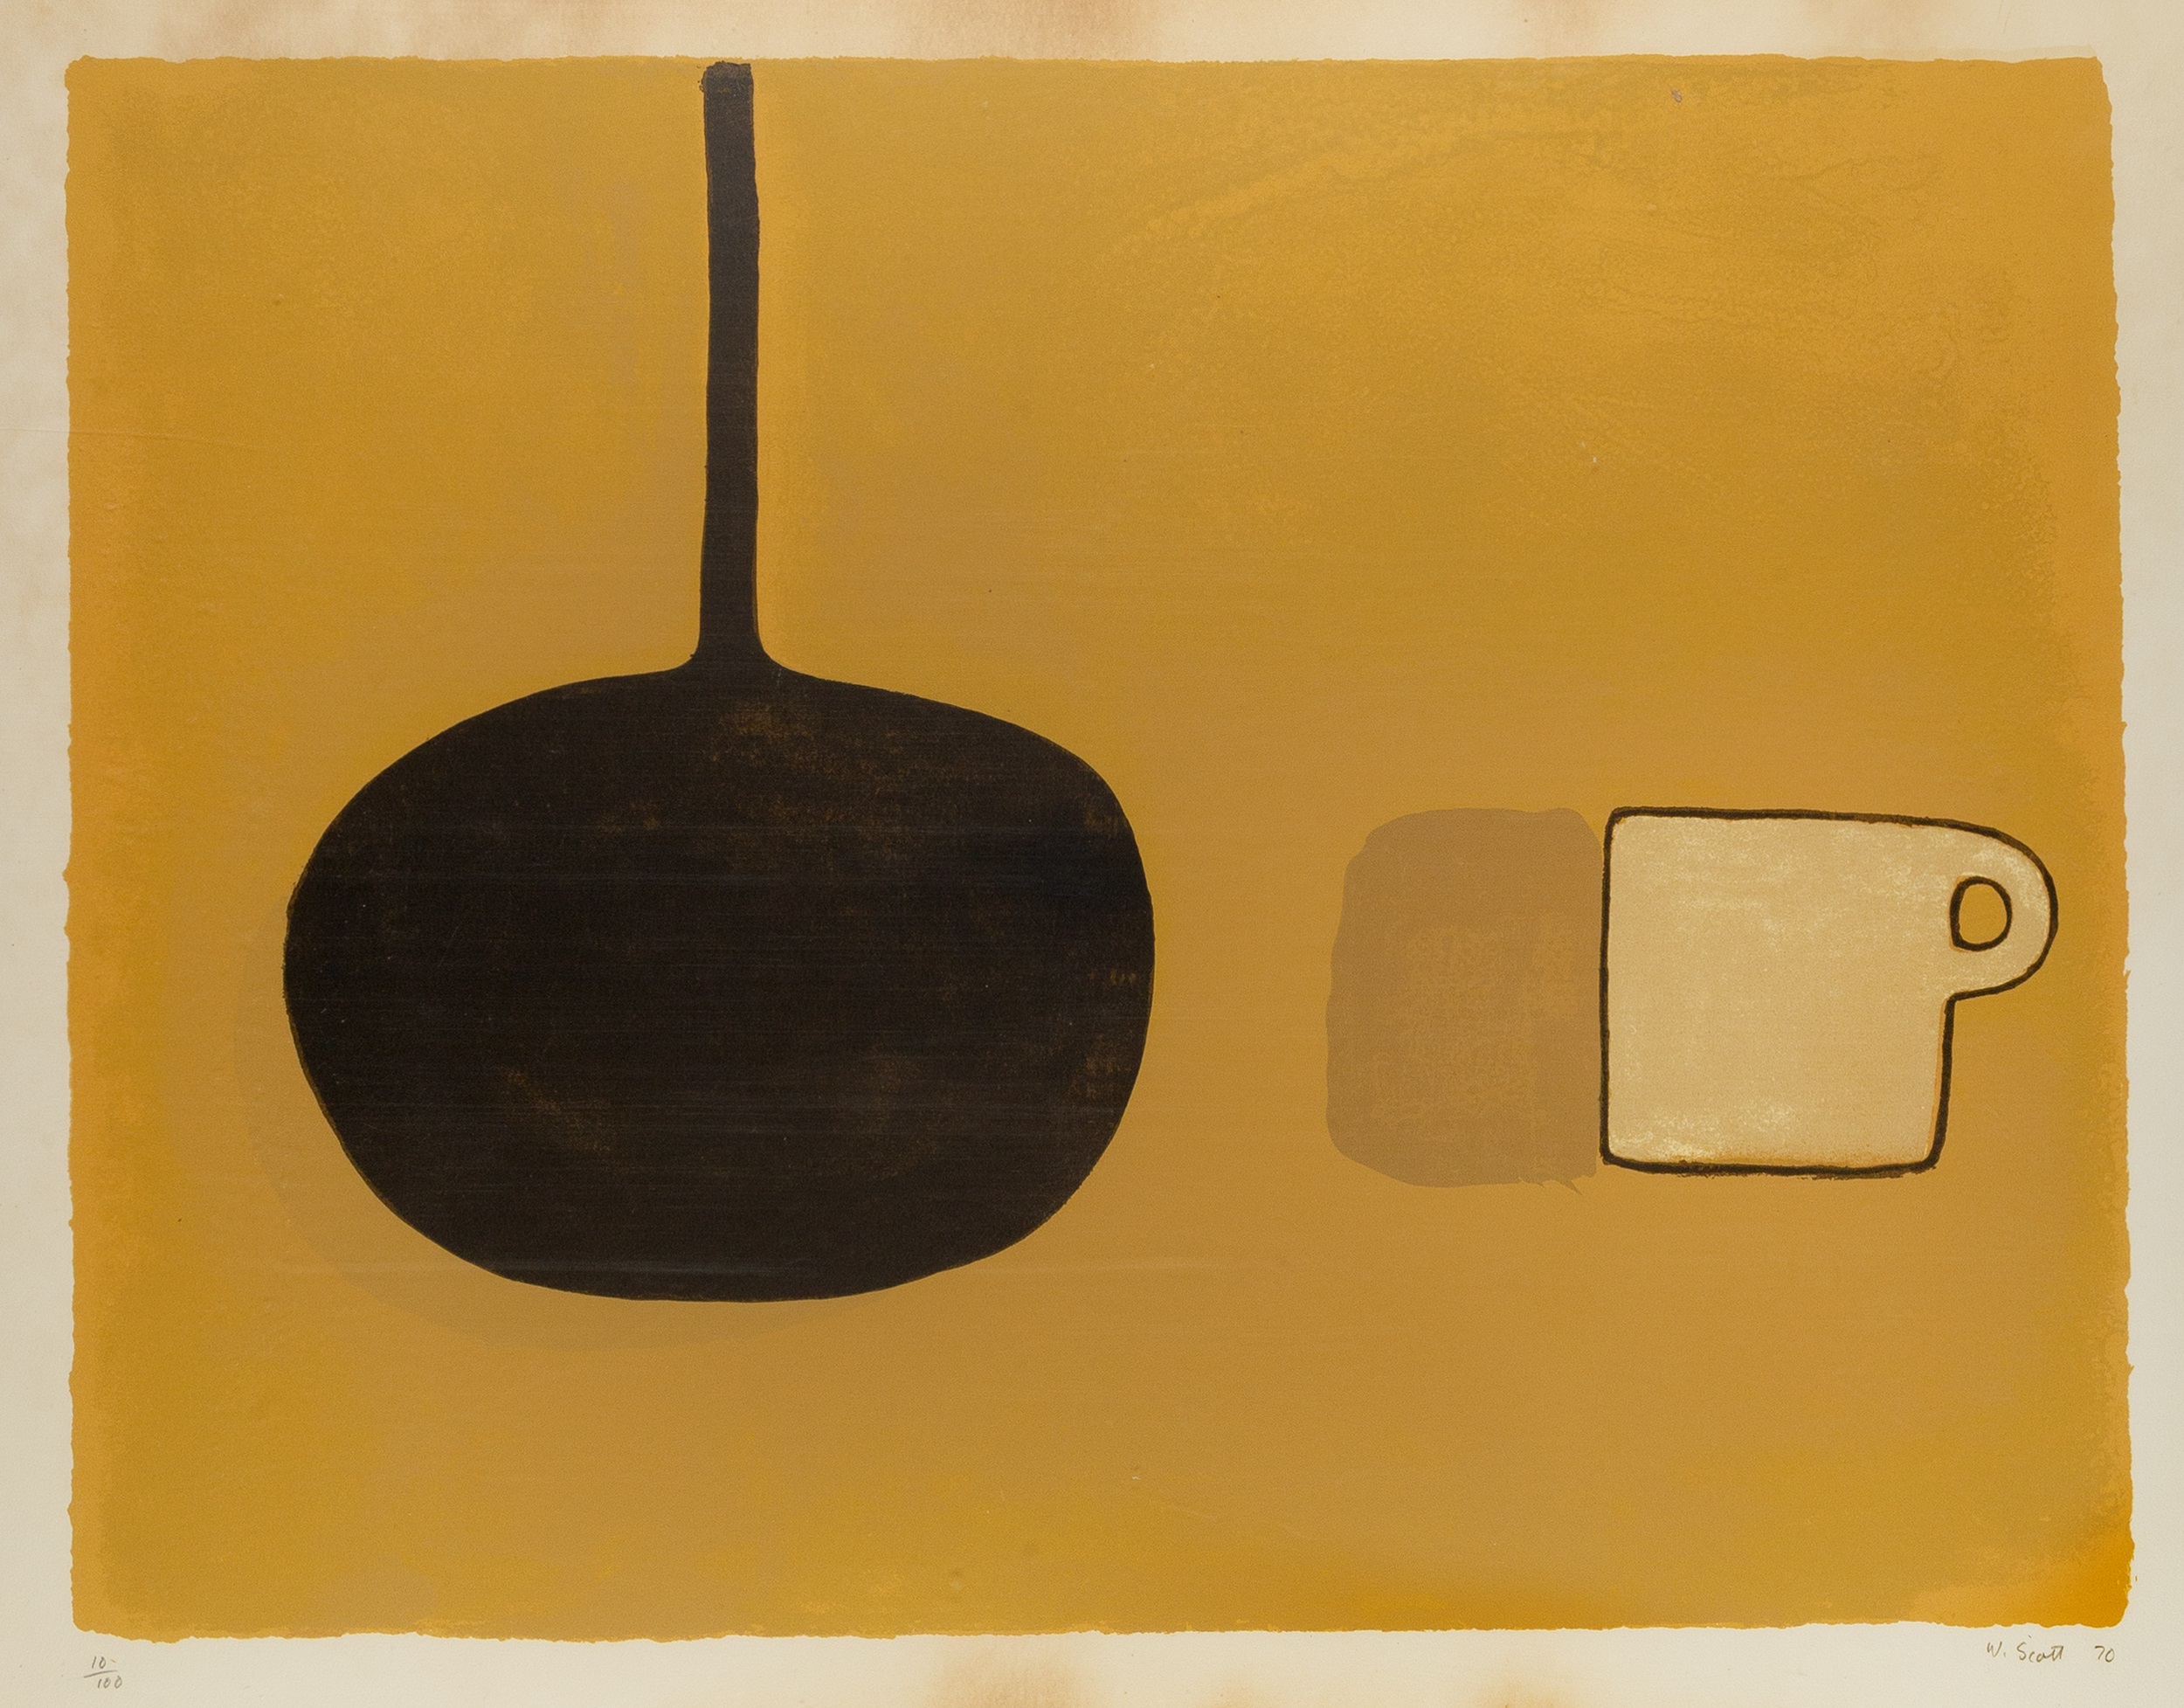 William Scott (1913-1989) Black Pan, Beige Cup on brown, 1970 10/100, signed, dated, and numbered in